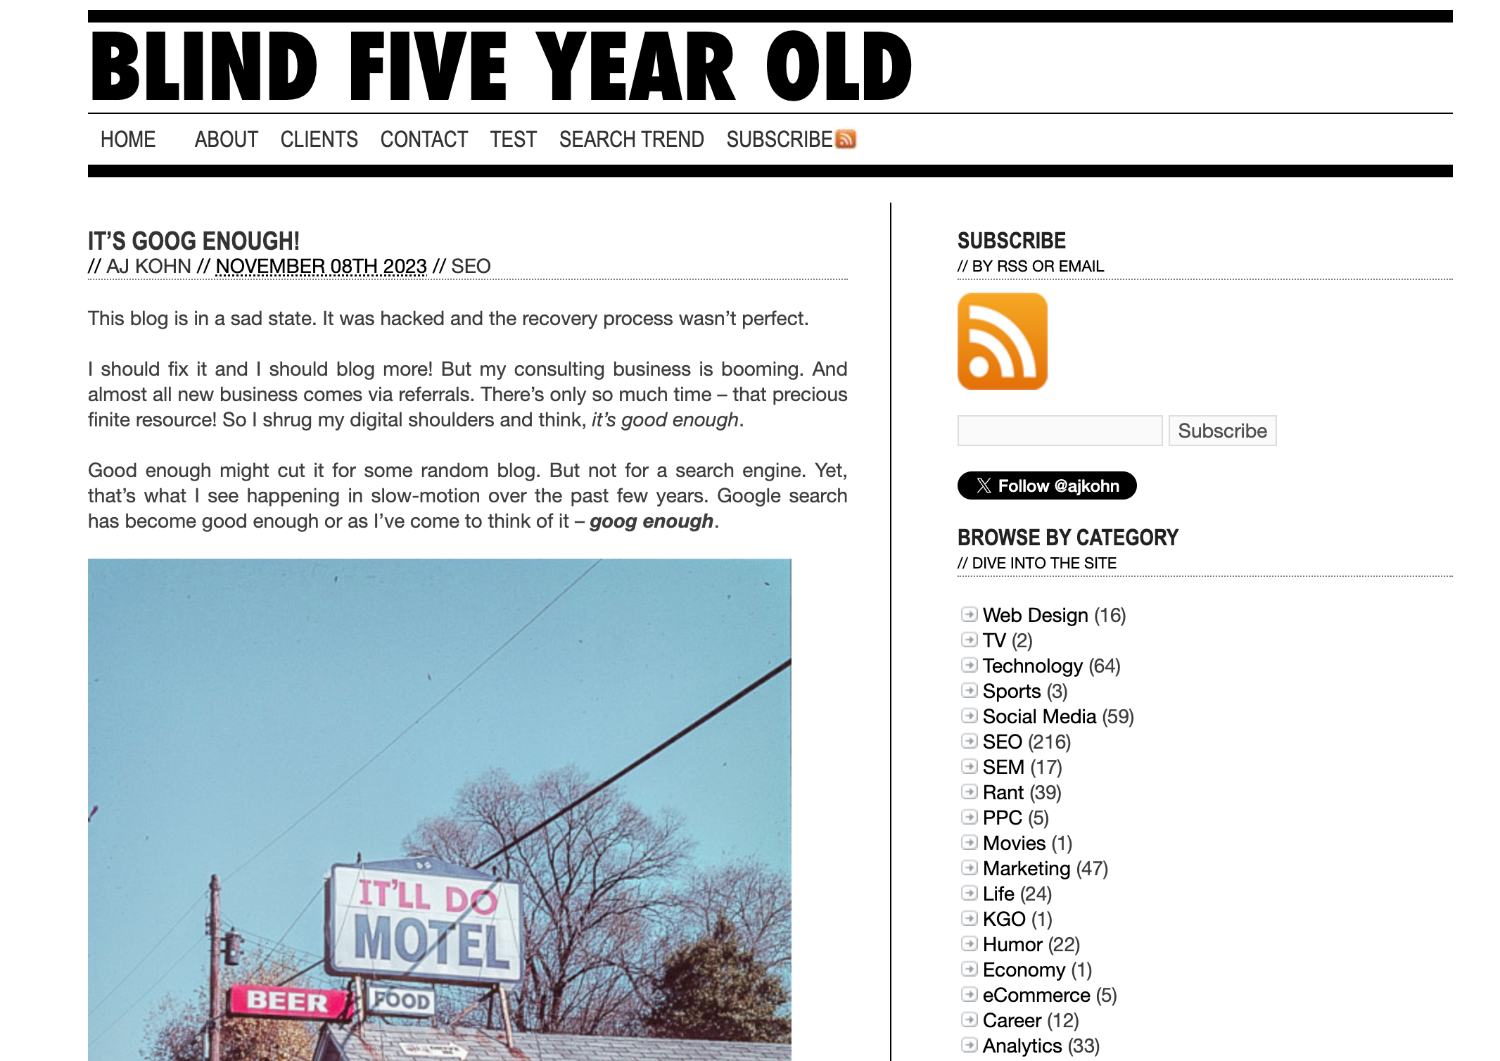 Marketing article by online publication Blind Five Year Old